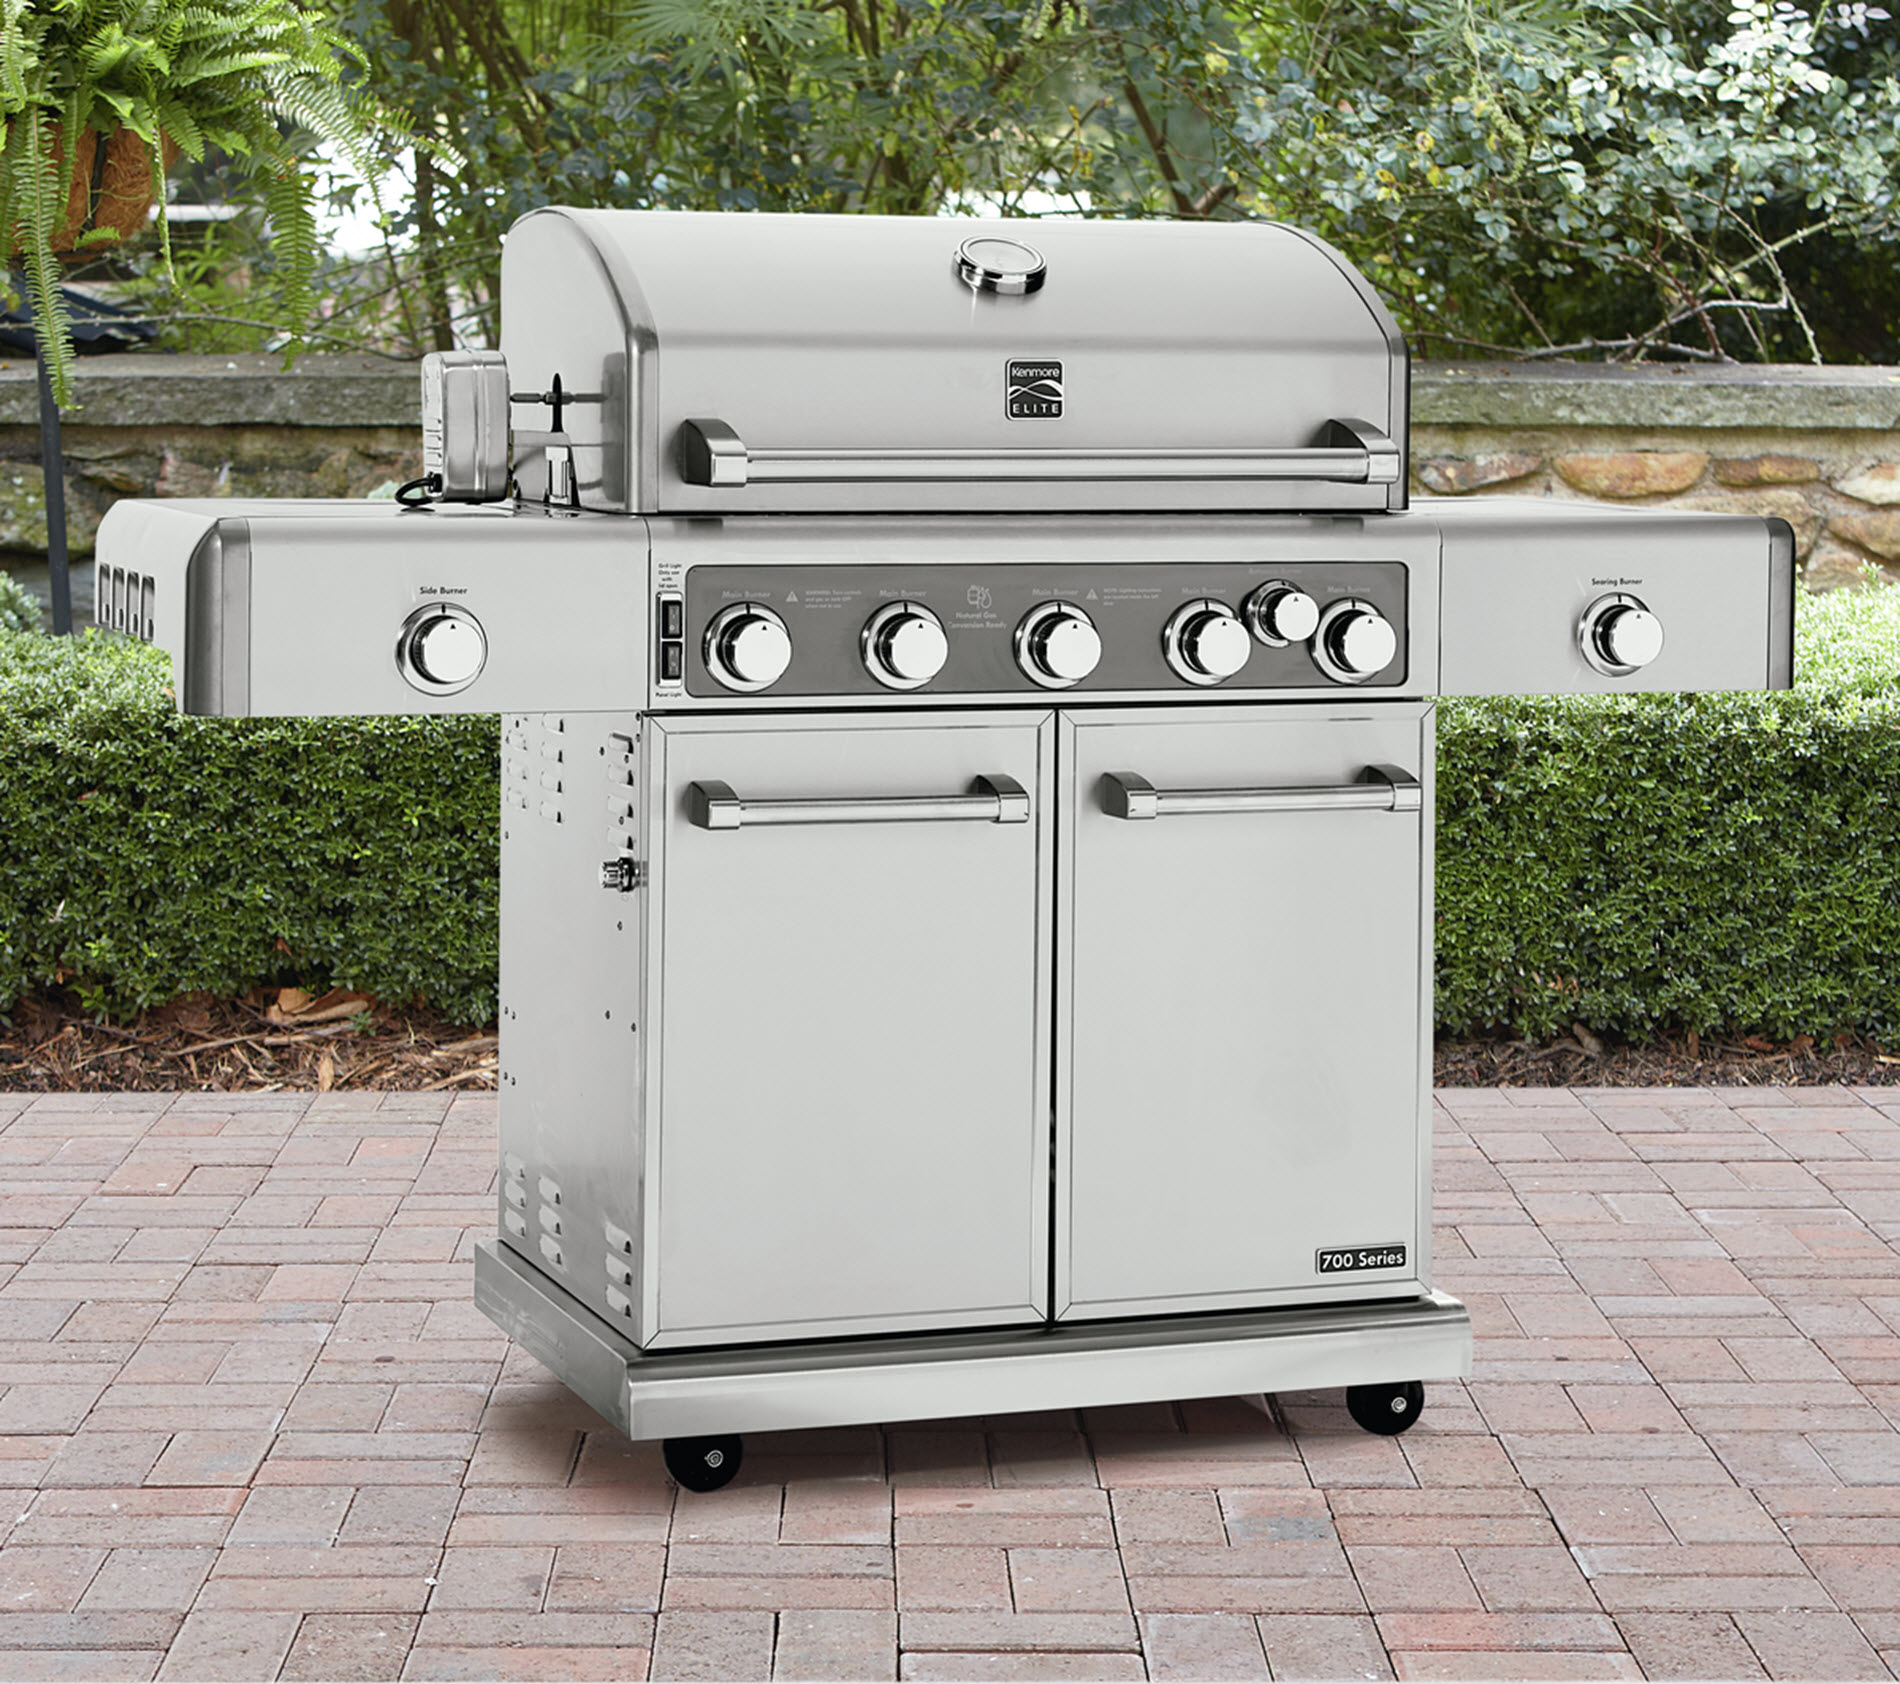 Kenmore Elite 5 Burner Gas Grill with Motorized Rotisserie Kit in Stainless Steel